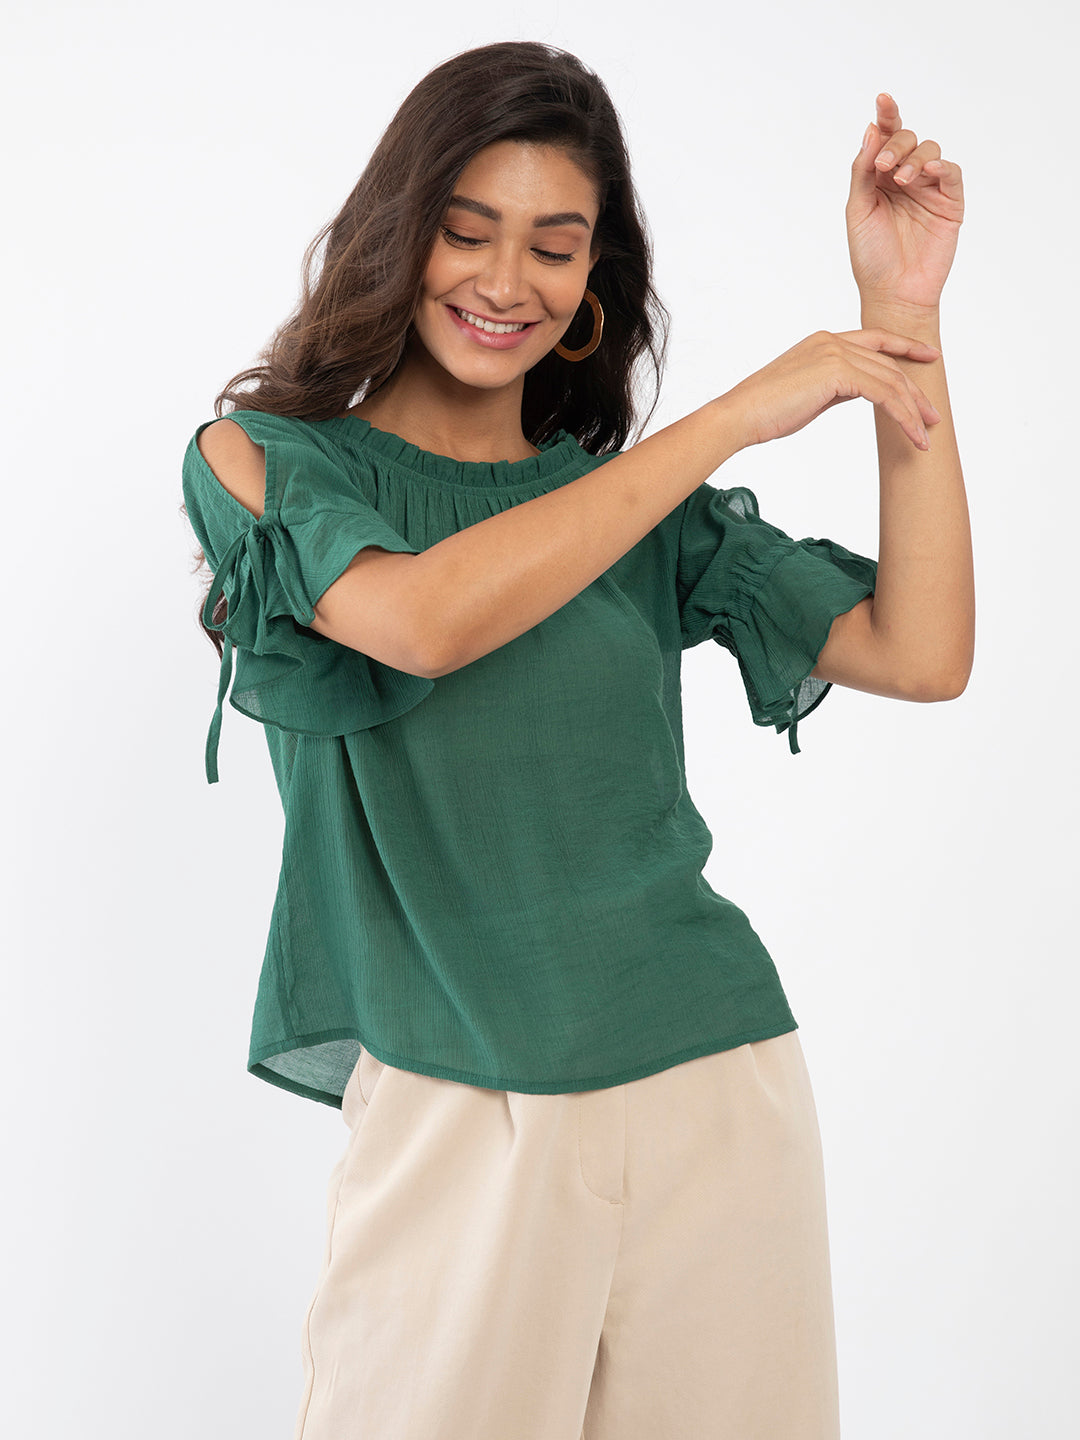 Green Solid Slit Sleeve Top For Women